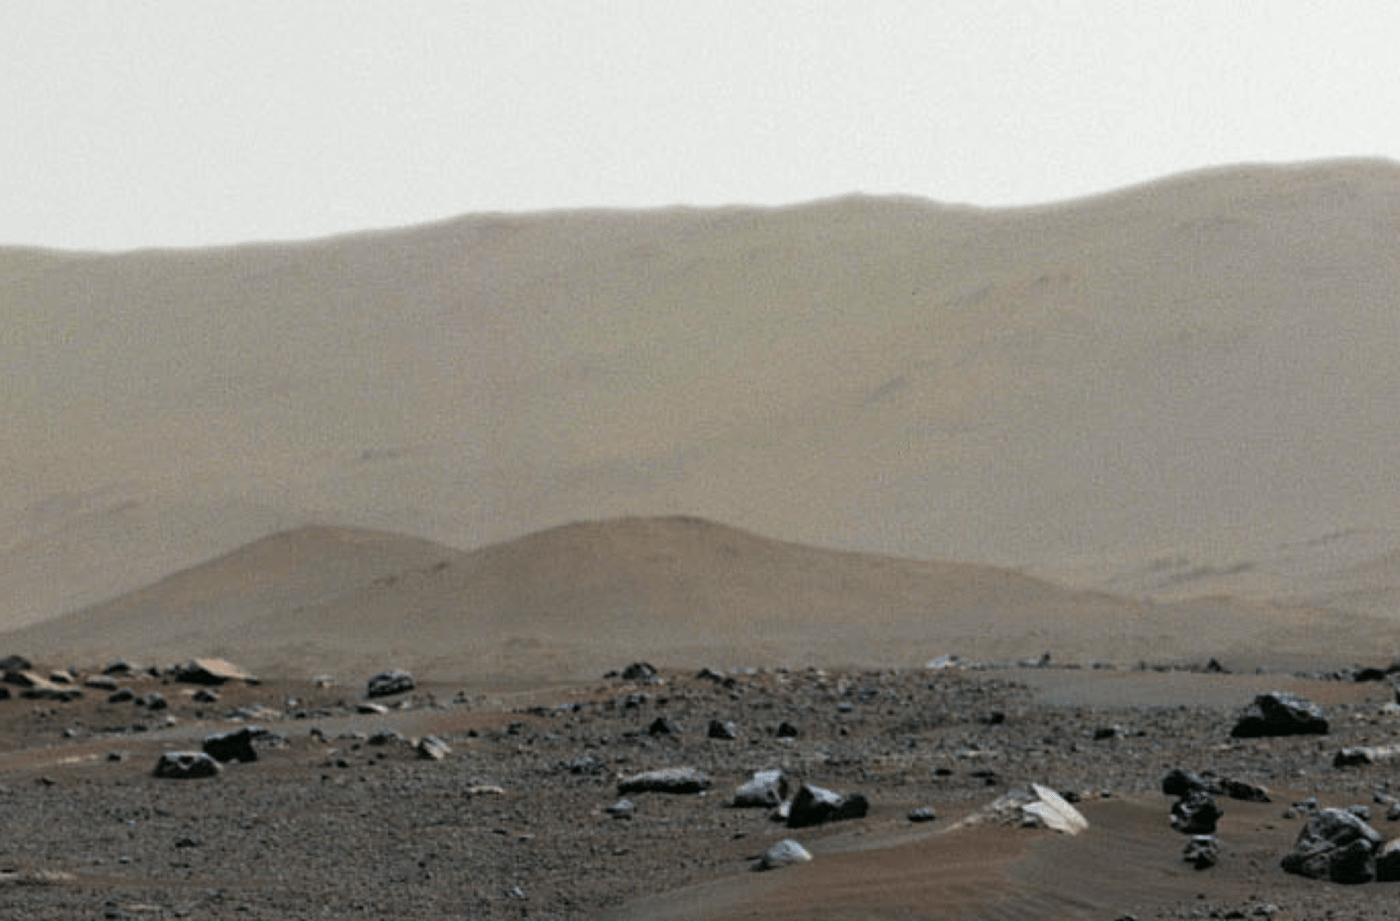 a martian landscape showing a rising hill in the distance